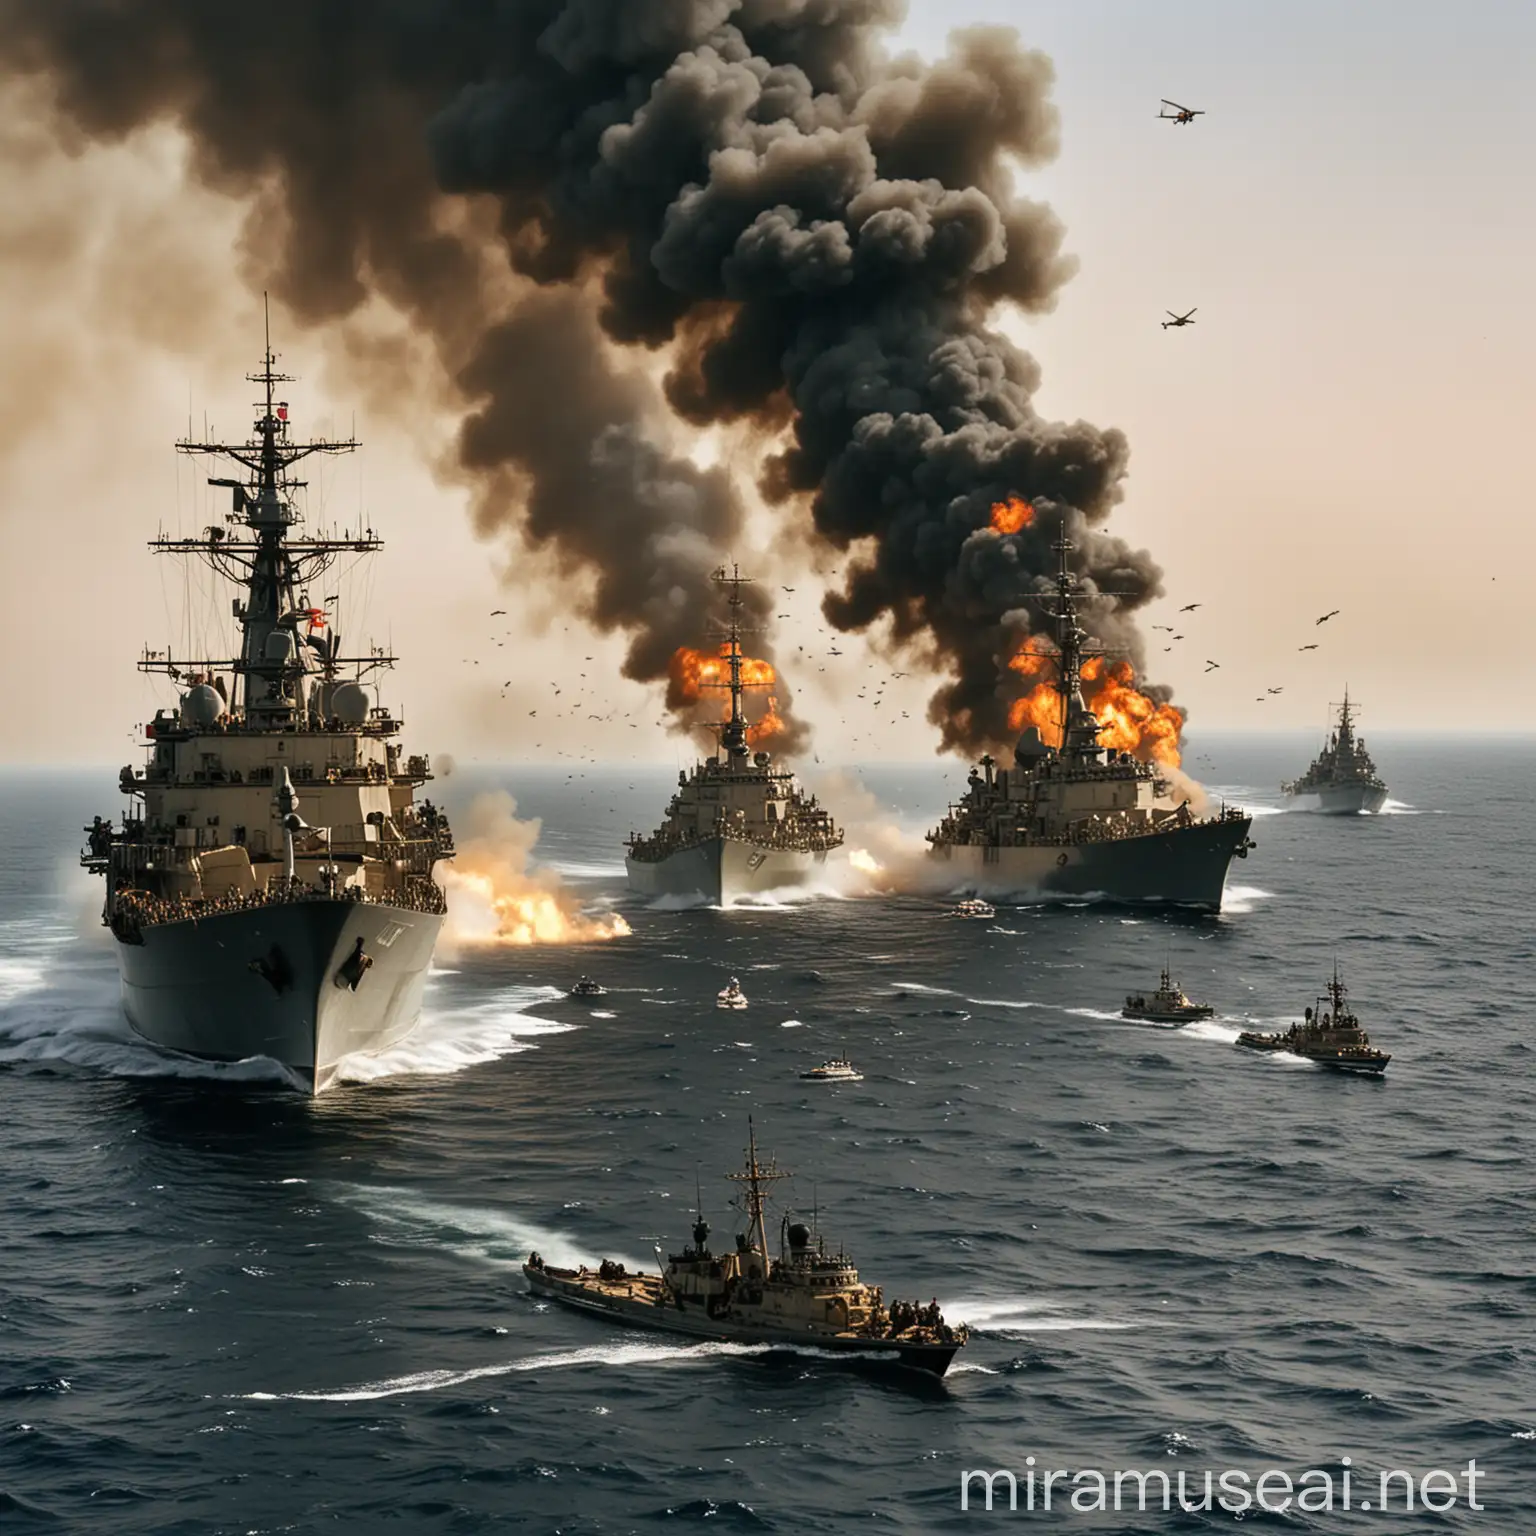 the first gulf war  with air, ground and naval ship battle in one image